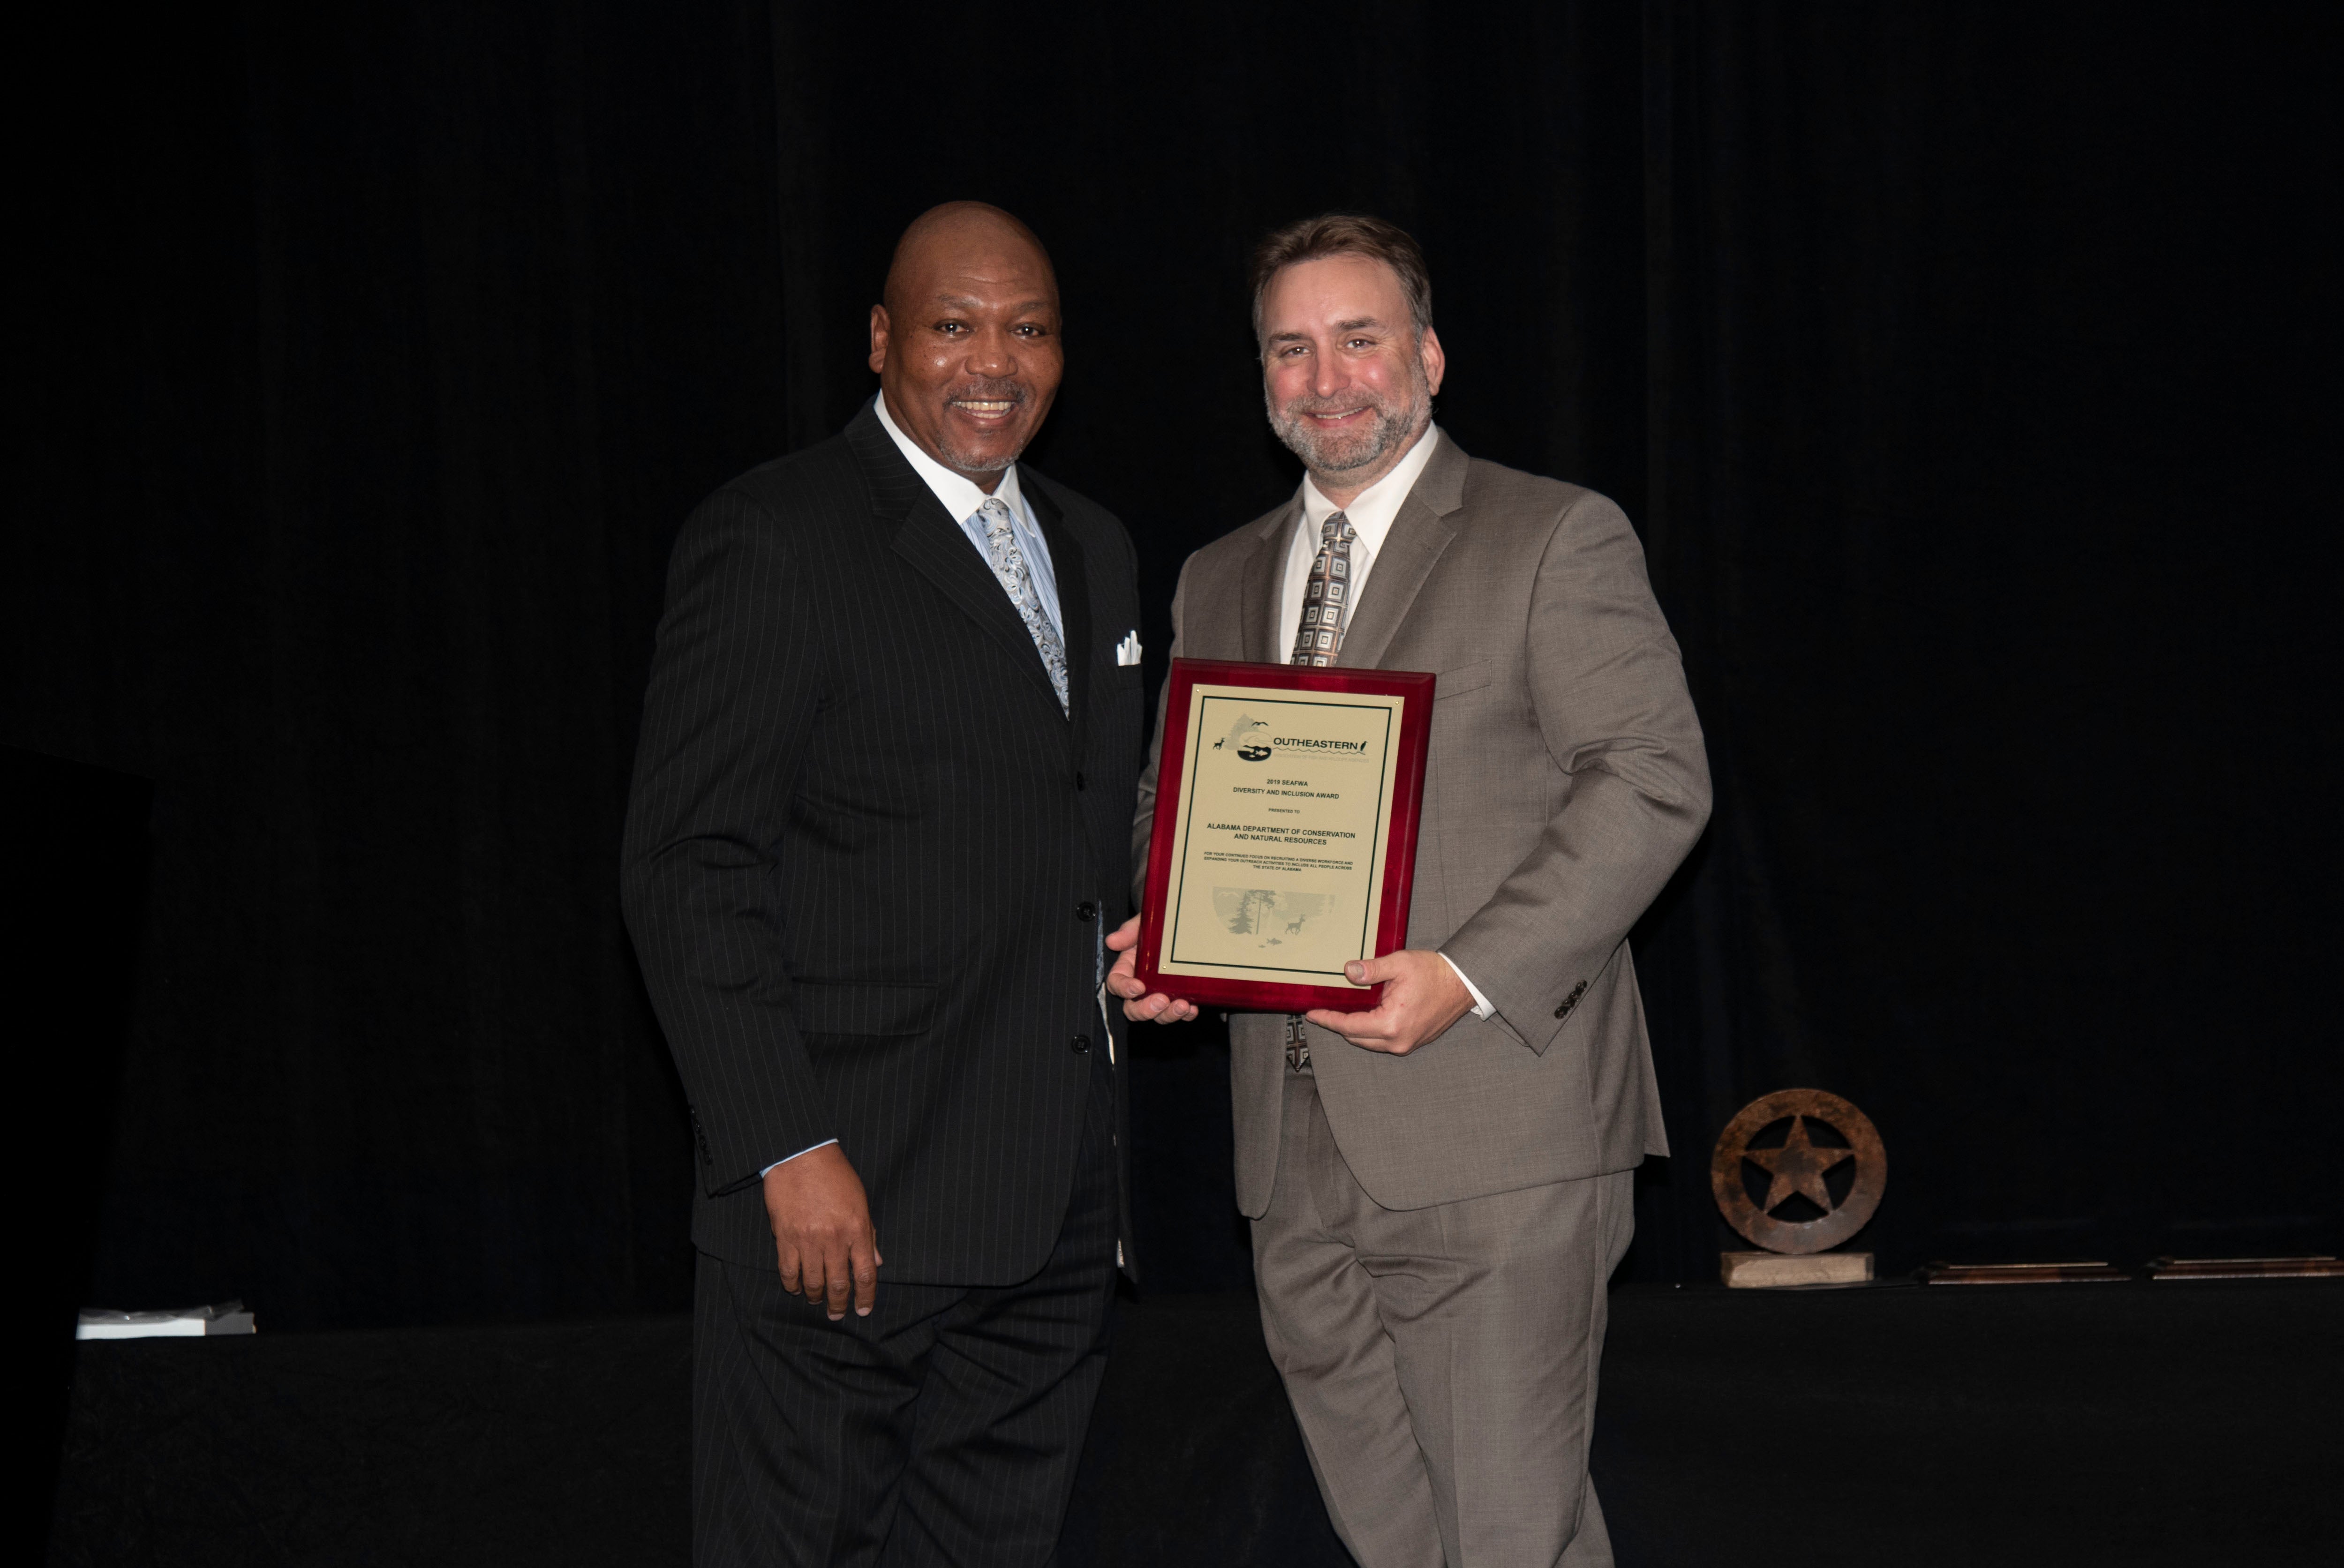 David Buggs (left): Chair of Diversity and Inclusion Award Committee, Texas Parks and Wildlife Department Chief Diversity and Inclusion Officer and HR Director.  Chuck Sykes (right): SEAFWA President; Director Wildlife and Fisheries Division, Alabama Department of Conservation and Natural Resources.